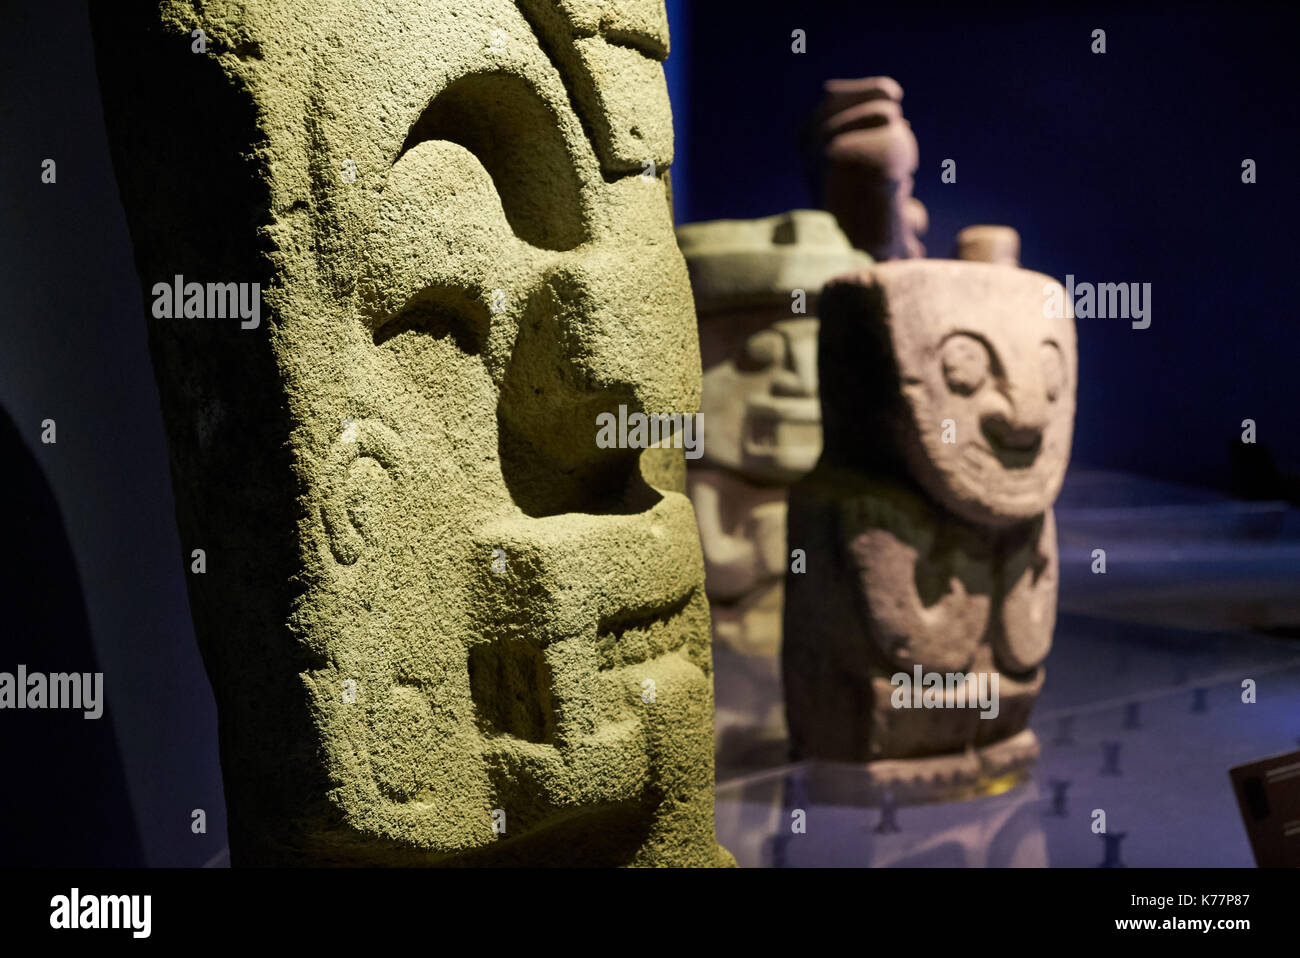 stone carved statues inside museum of San Agustin, UNESCO world heritage site, Colombia, South America Stock Photo